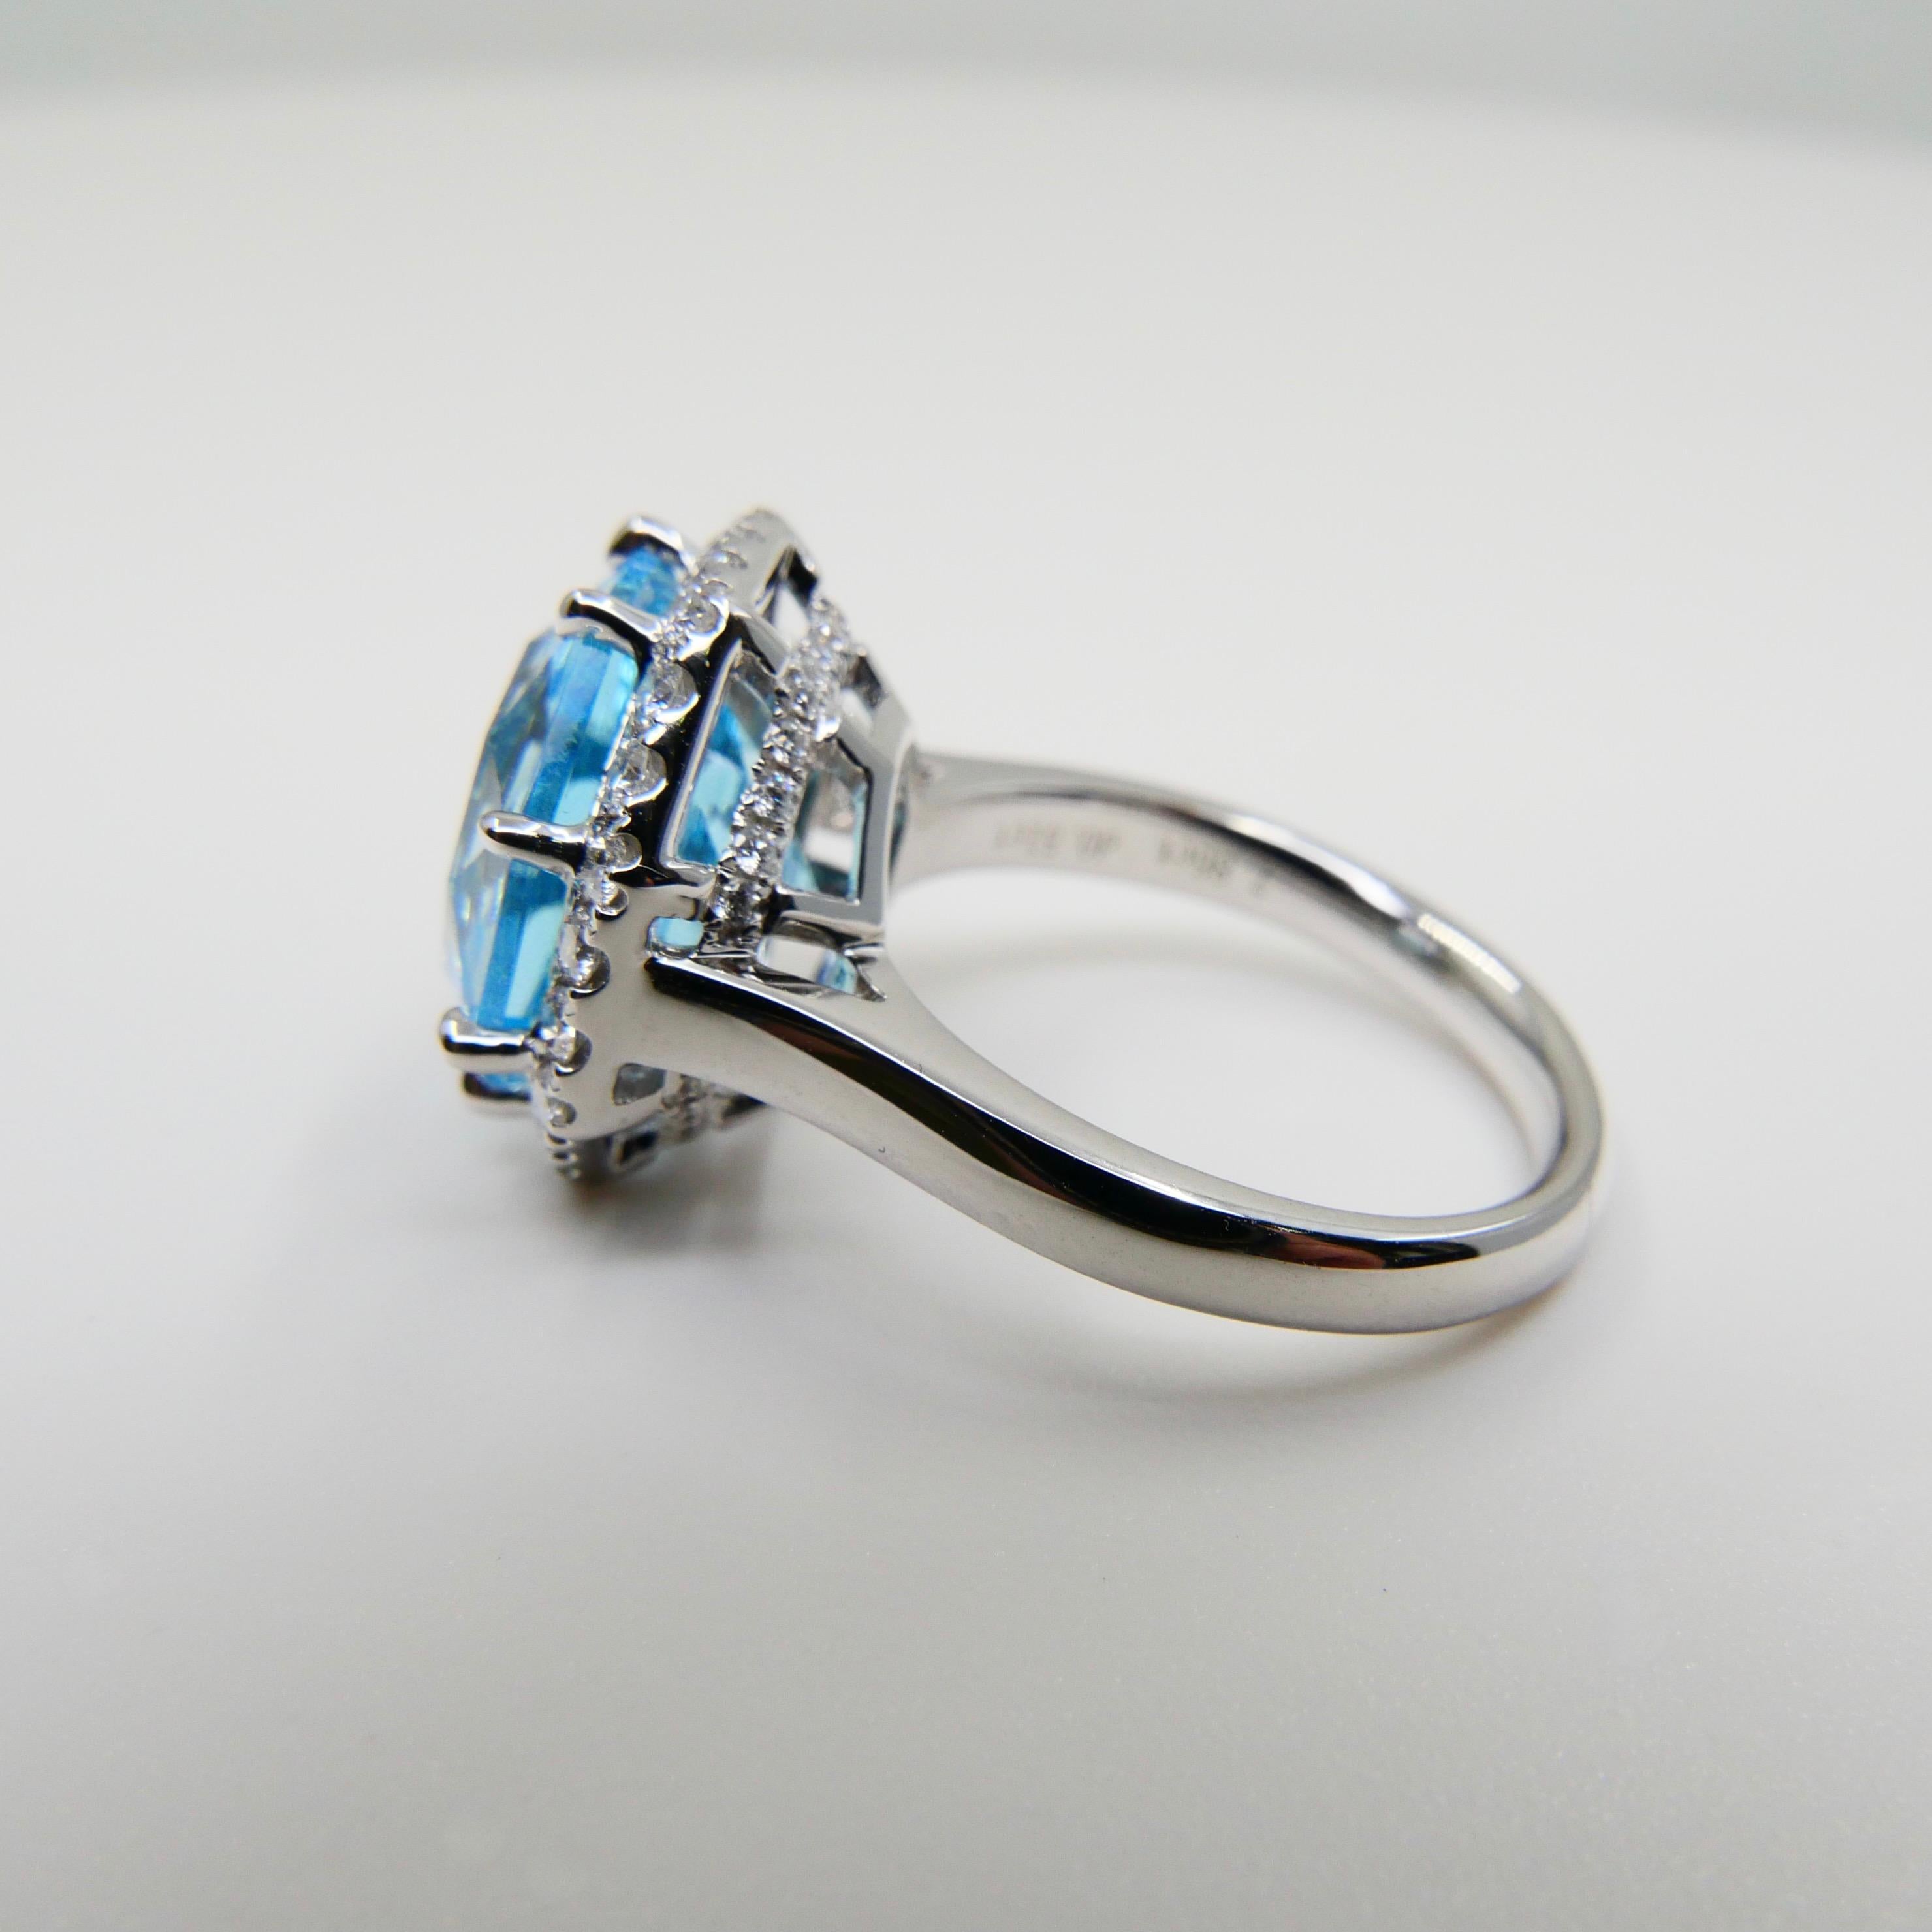 Flower Cut Powder Blue Topaz 7.86 Cts and Diamond Cocktail Ring, Statement Ring For Sale 1